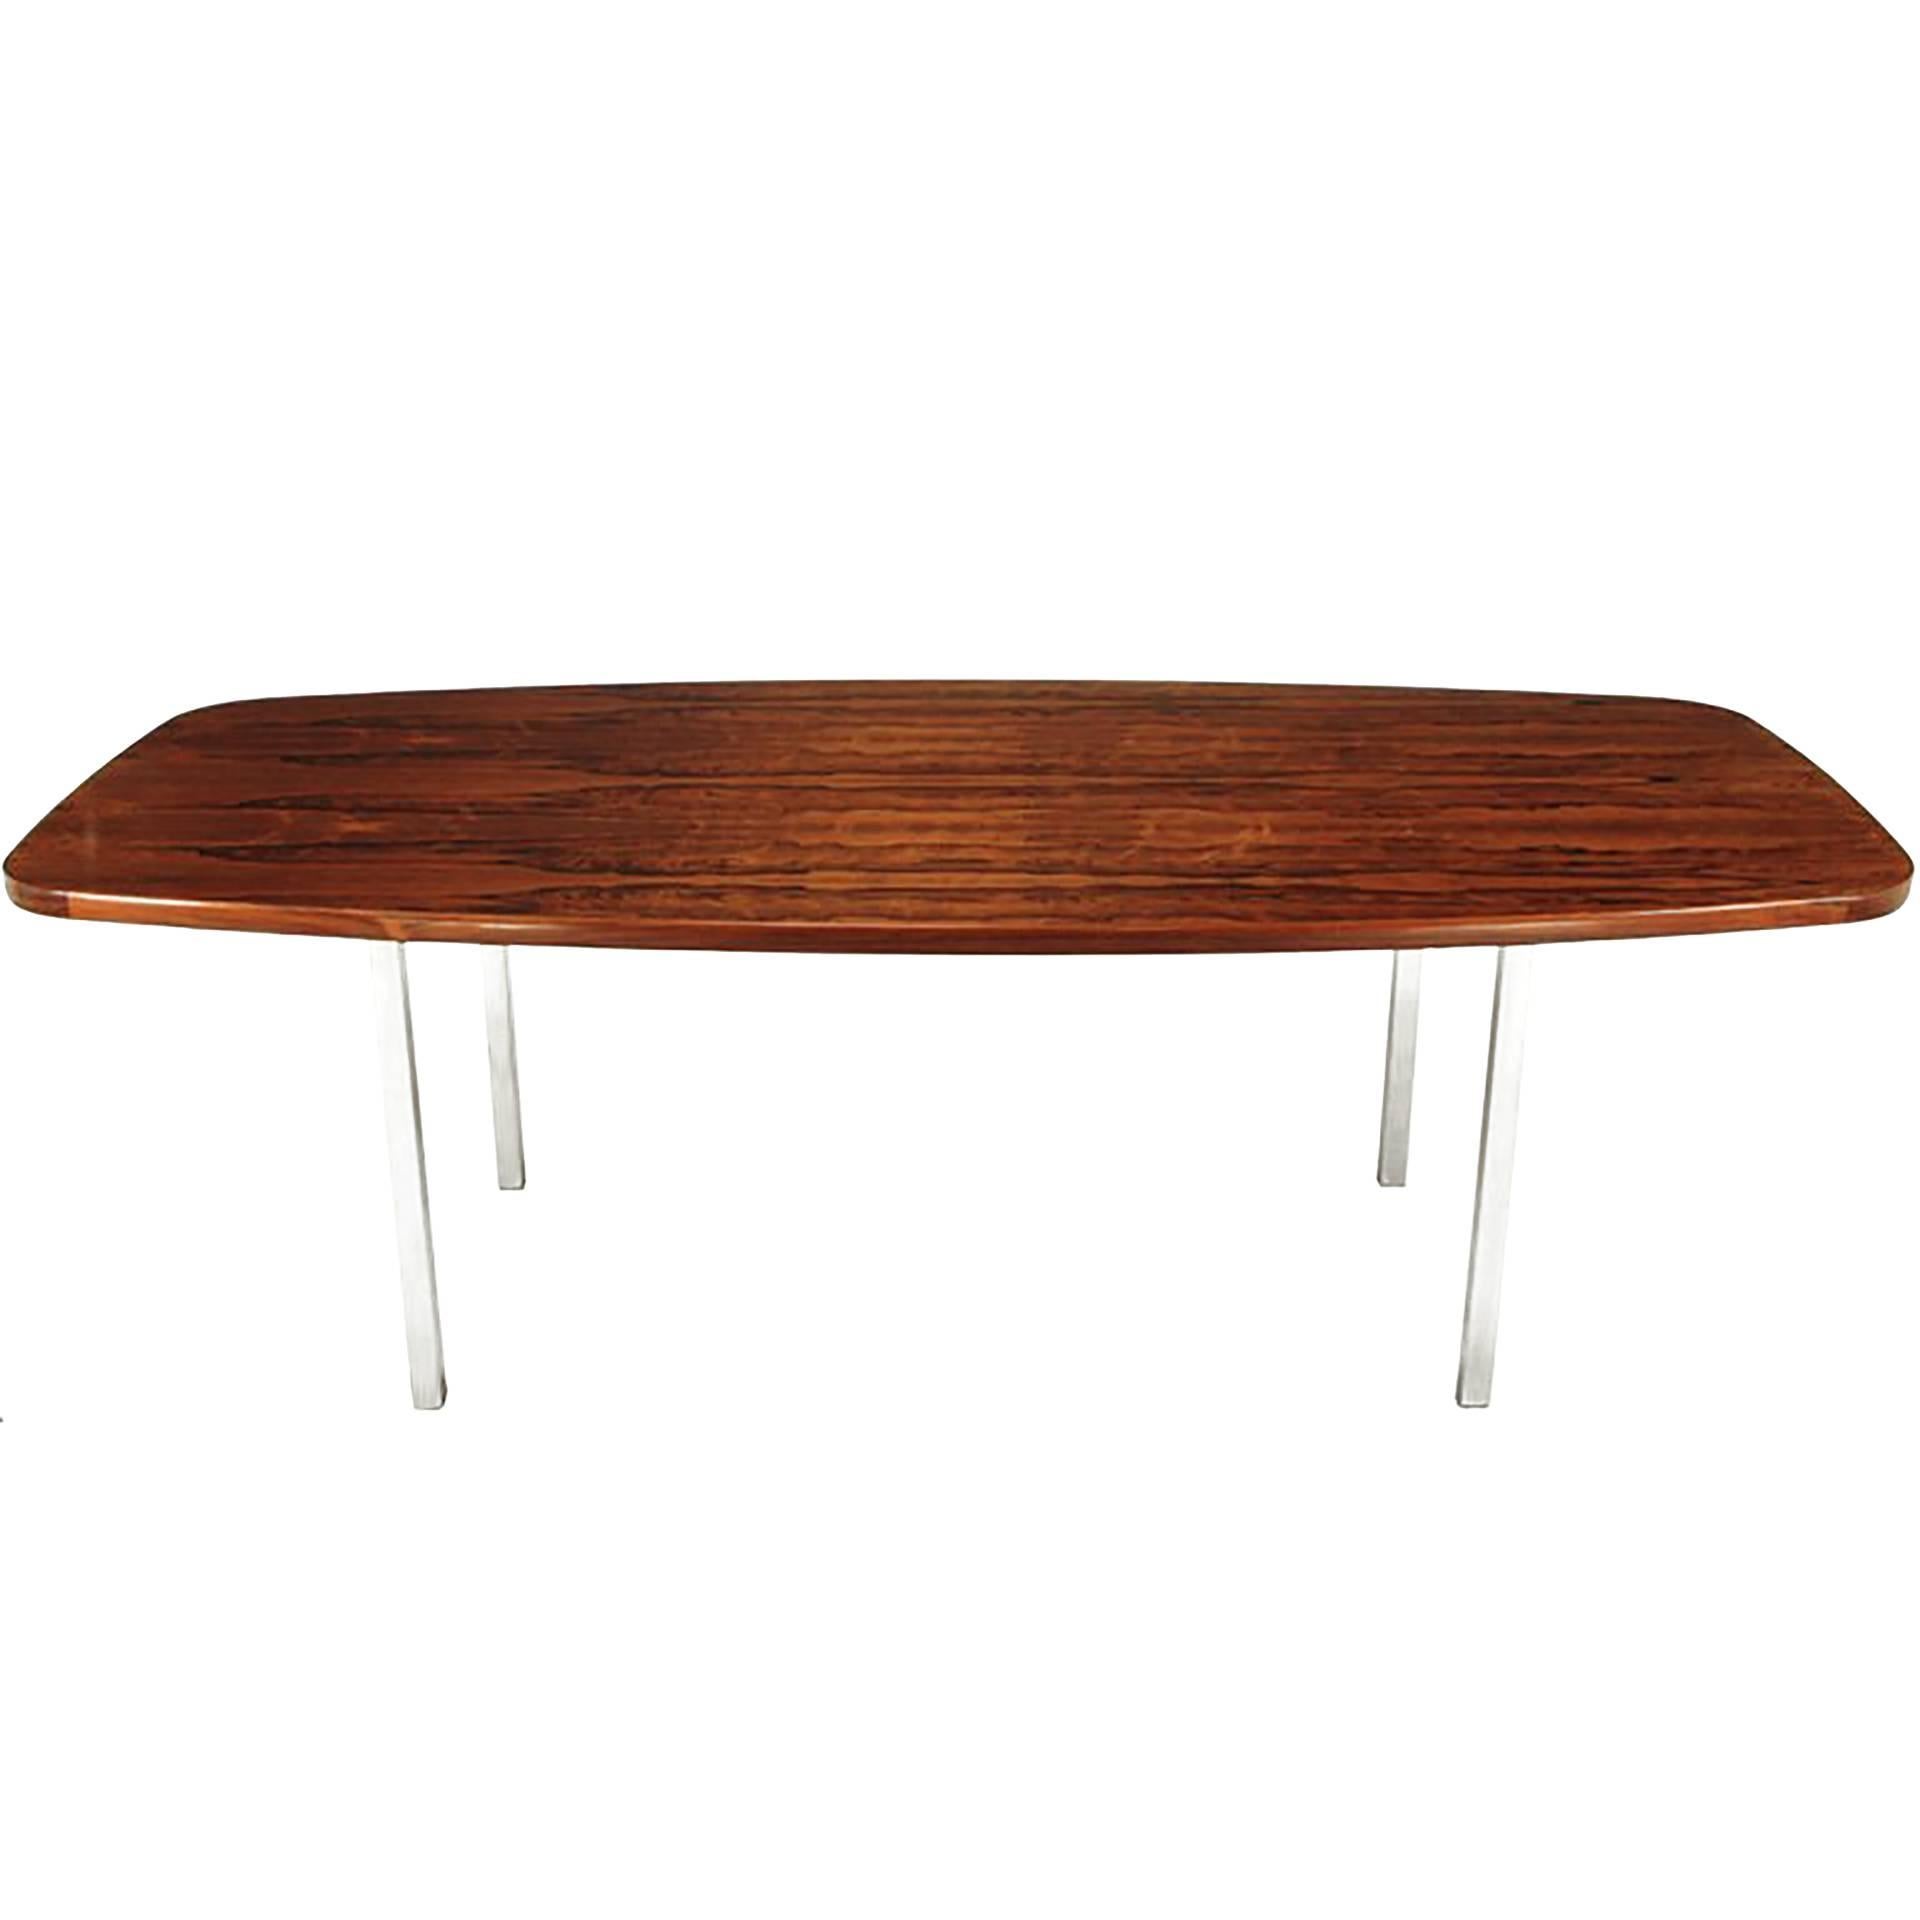 Dunbar Rosewood Dining Table with Polished Stainless Steel Base For Sale